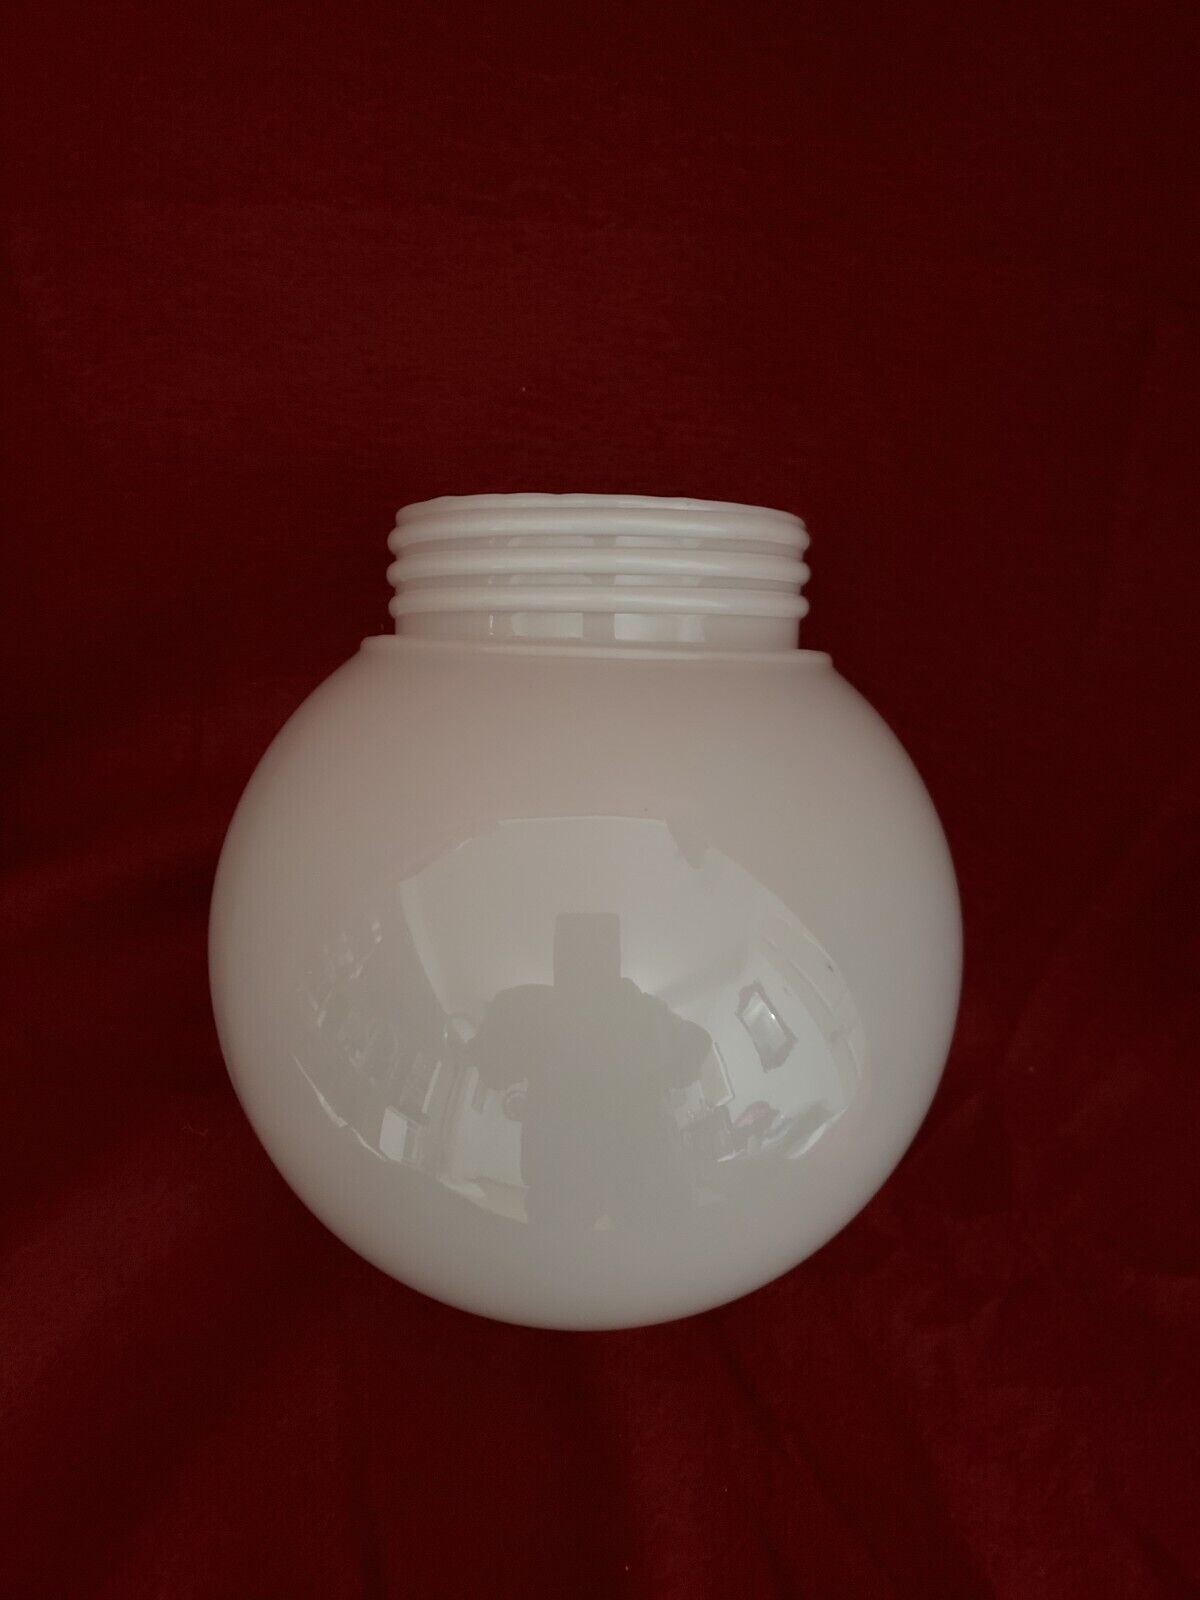 6 INCH WHITE GLASS GLOBE LAMP SHADE 3 1/4 INCH THREADED FITTER